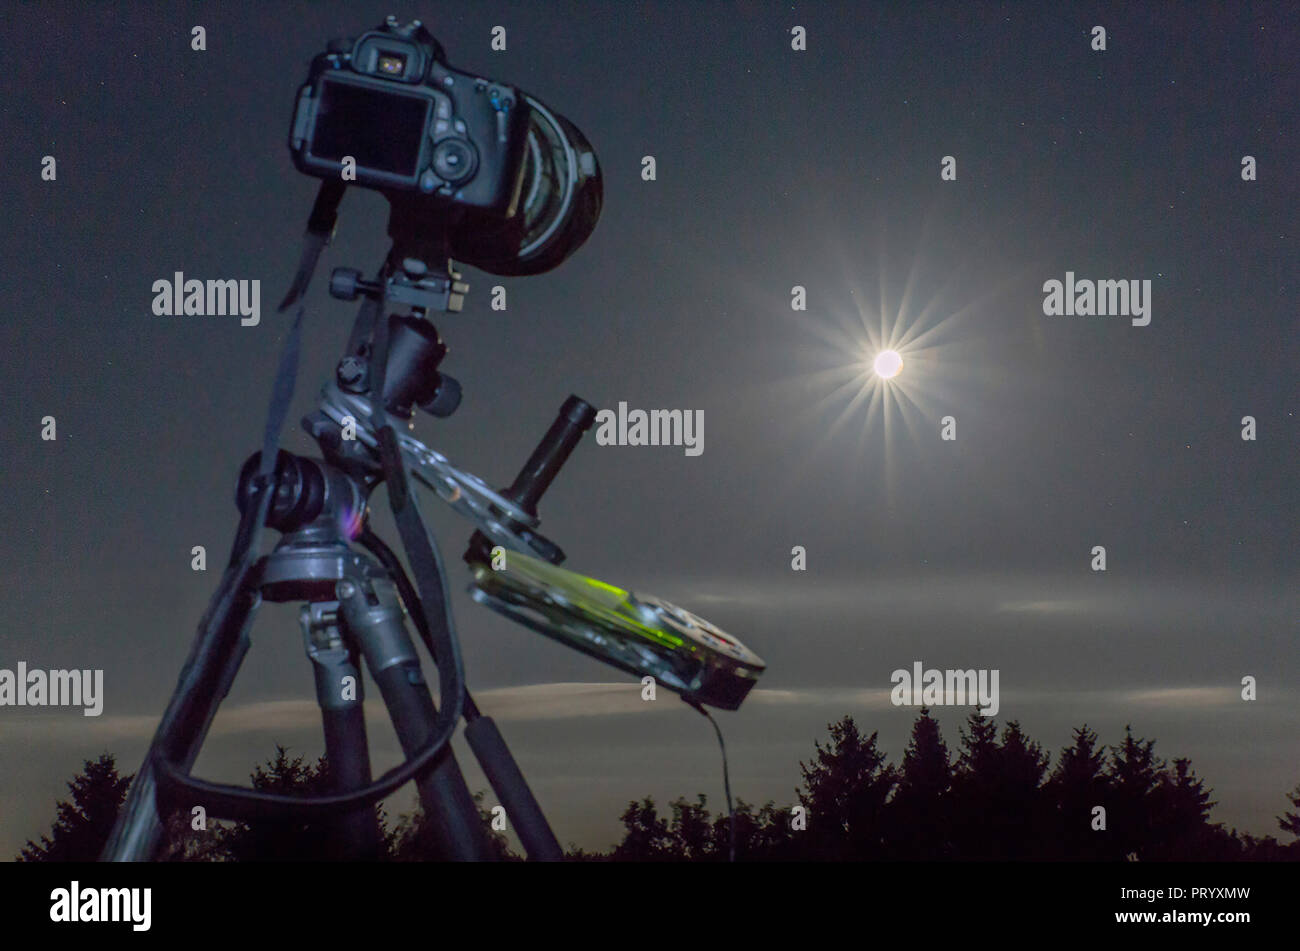 Germany, Hesse, Hochtaunuskreis, Equipment used for astro photography, photographing a full moon eclipse Stock Photo